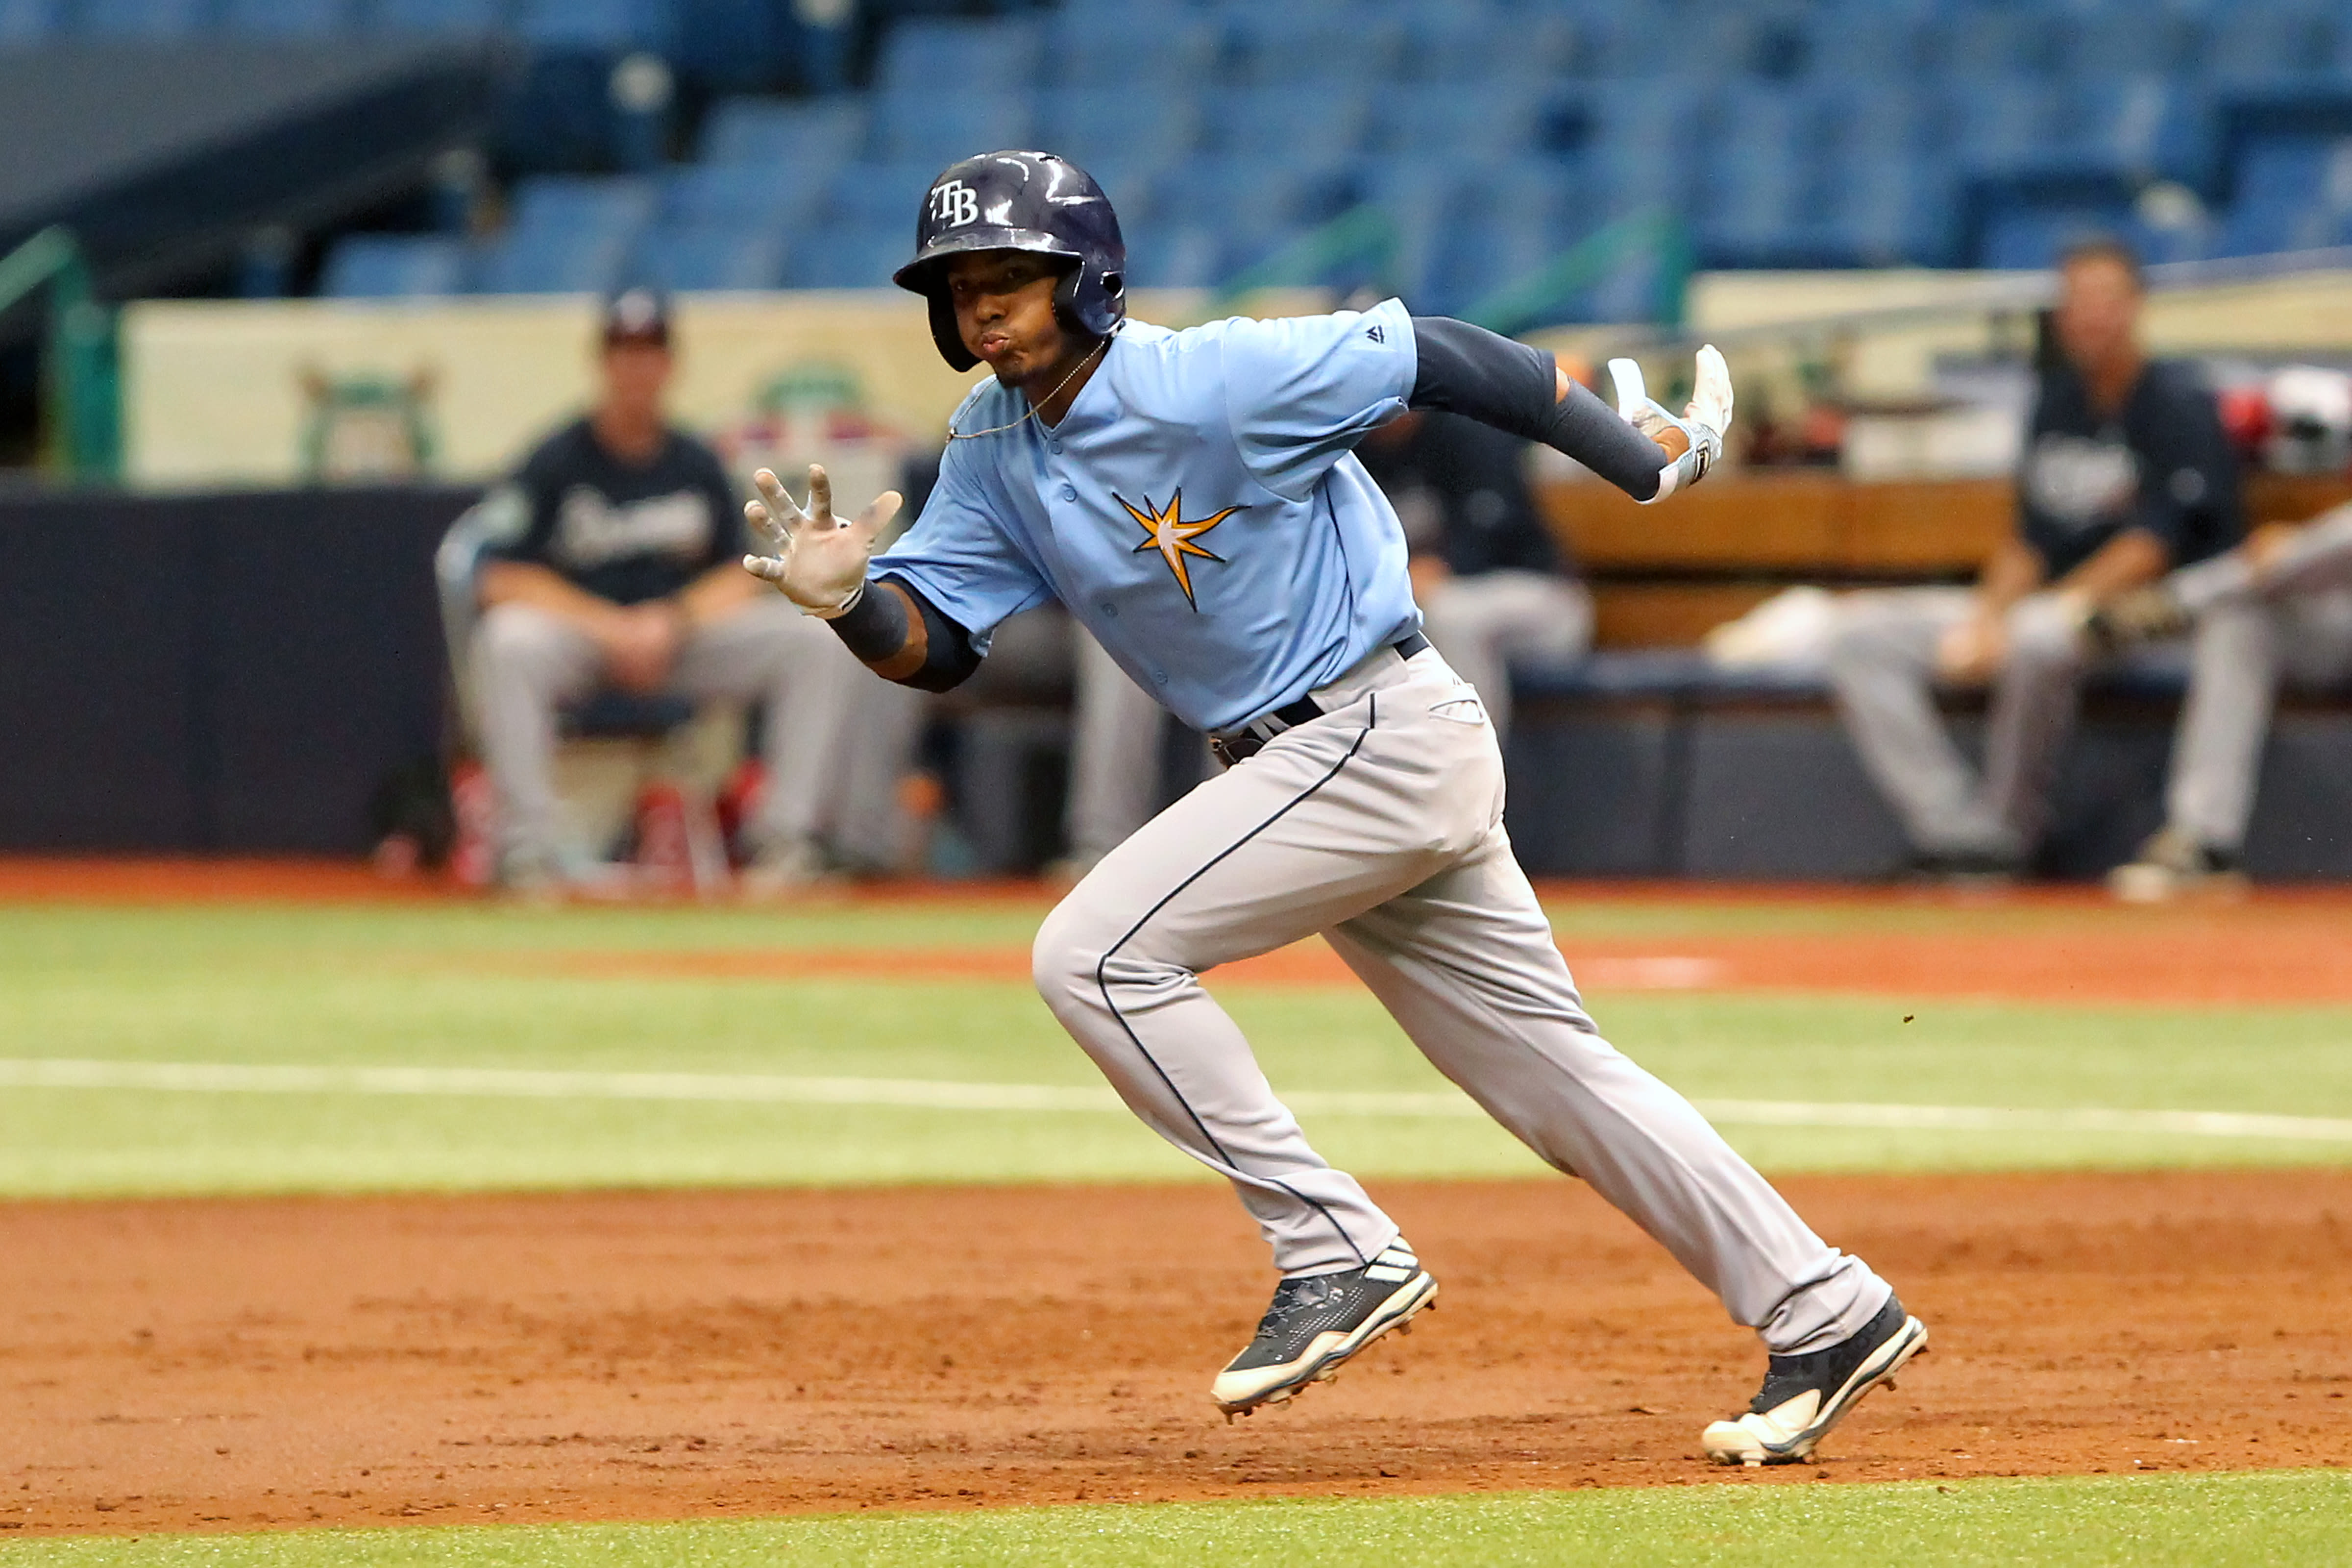 Rays top prospect Wander Franco one step closer to the majors